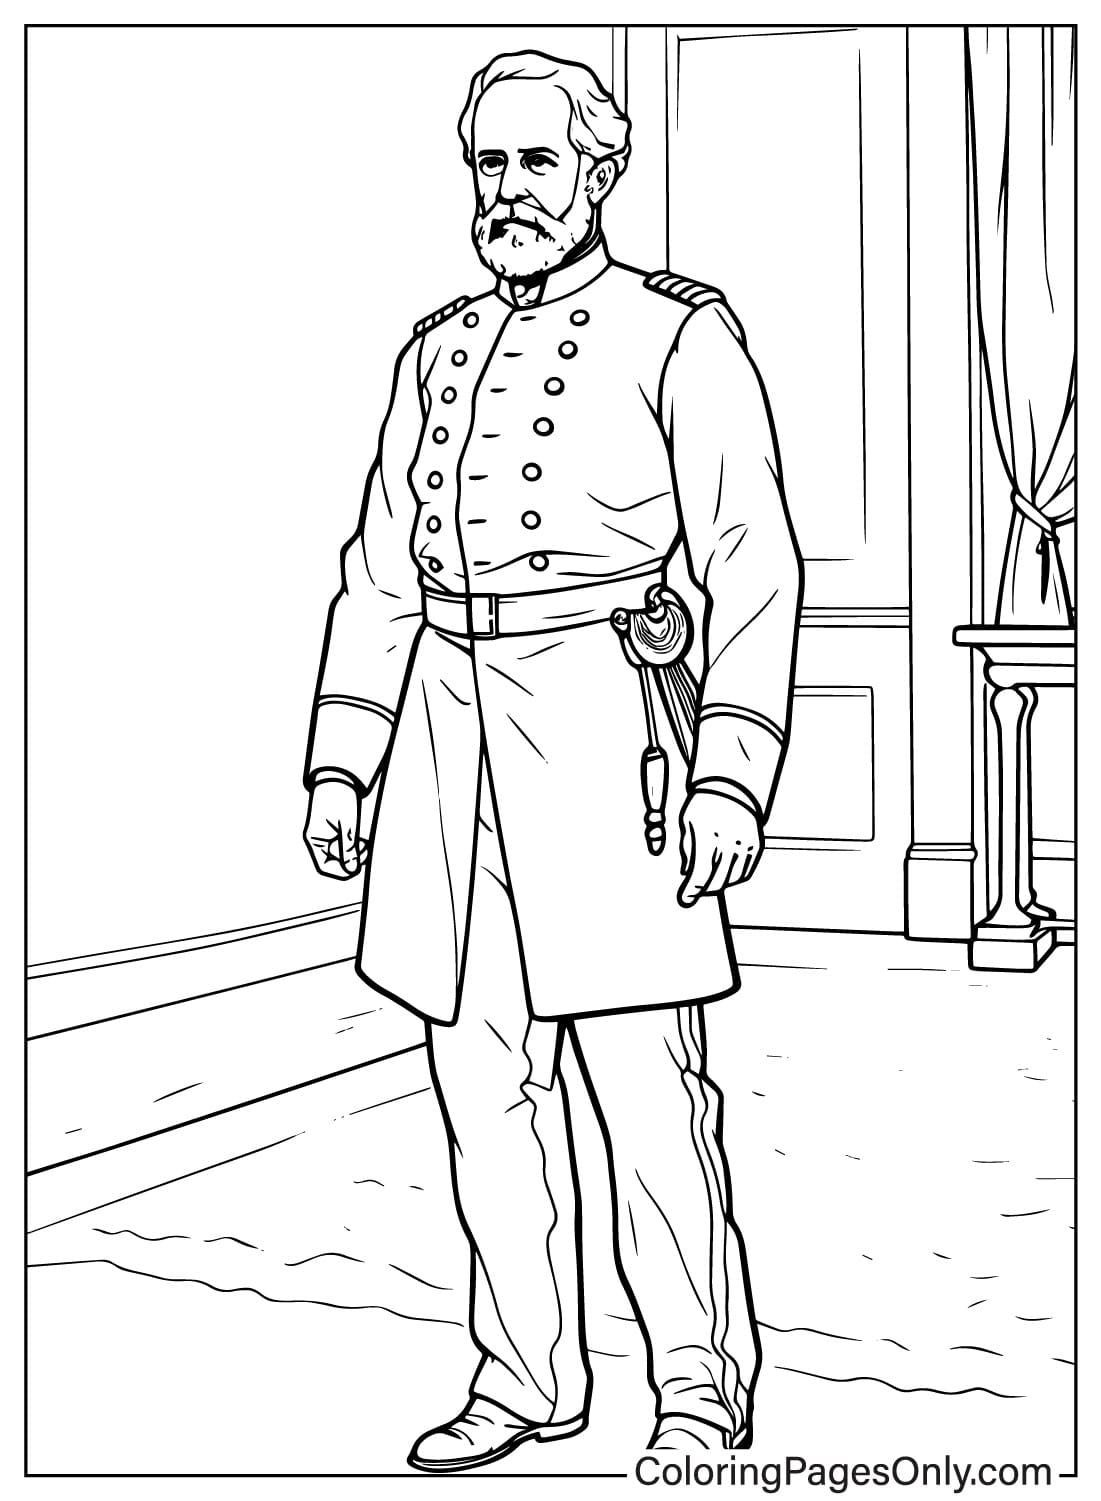 Robert E. Lee Printable Coloring Page from Robert E. Lee